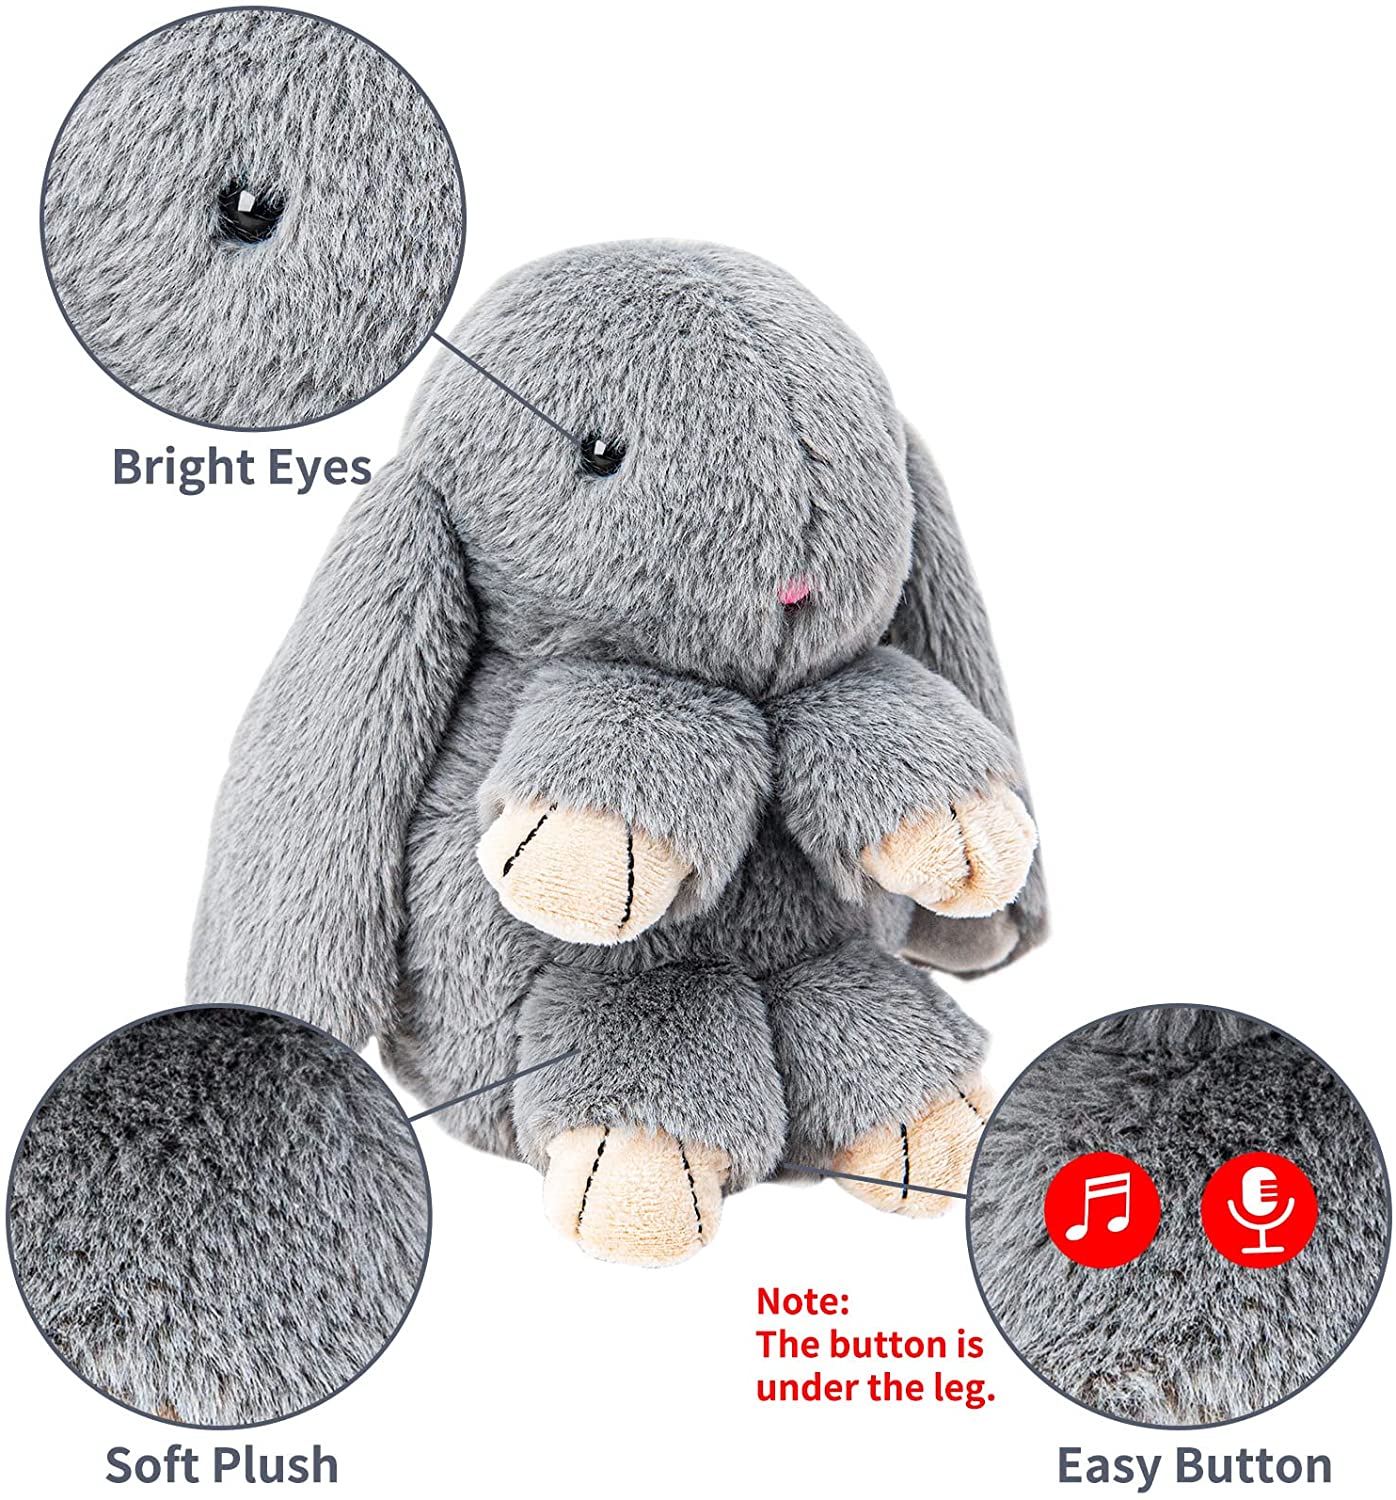 Talking Bunny Toys For Kids, Repeats What You Say, Interactive Stuffed Plush Animal Talking Toy, Singing, Dancing And Shaking For Girls Boys - TryKid